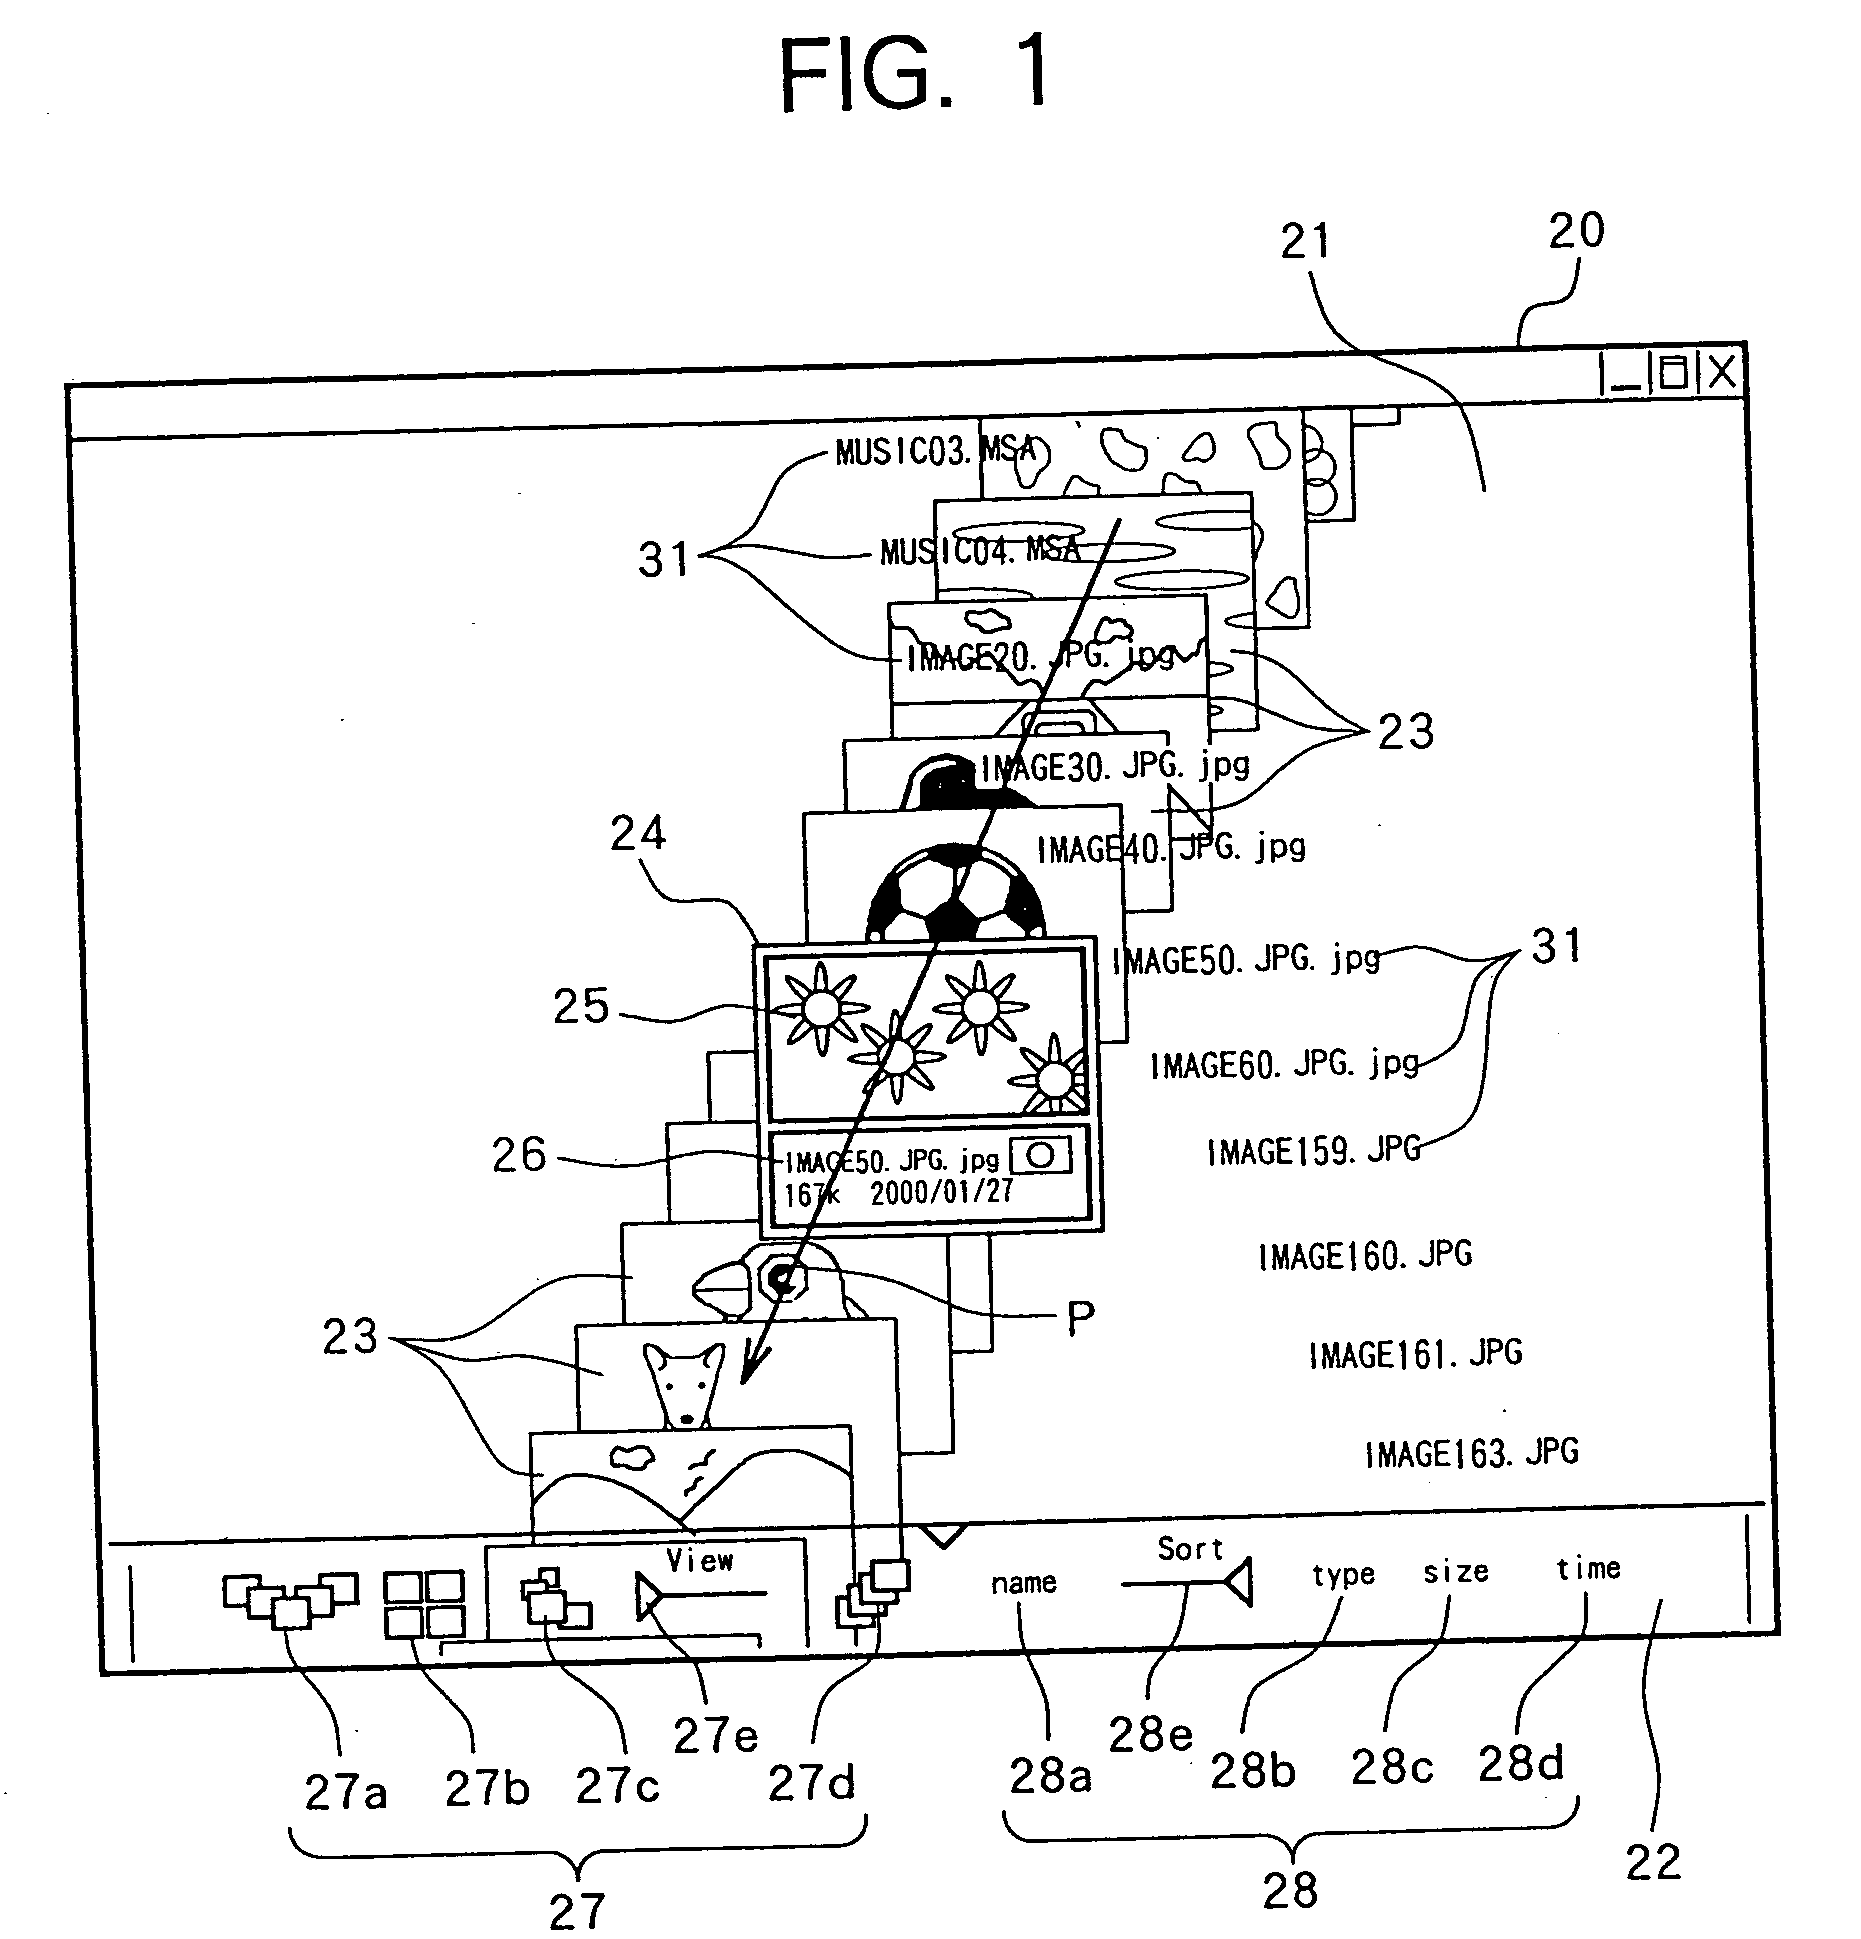 System for managing data objects